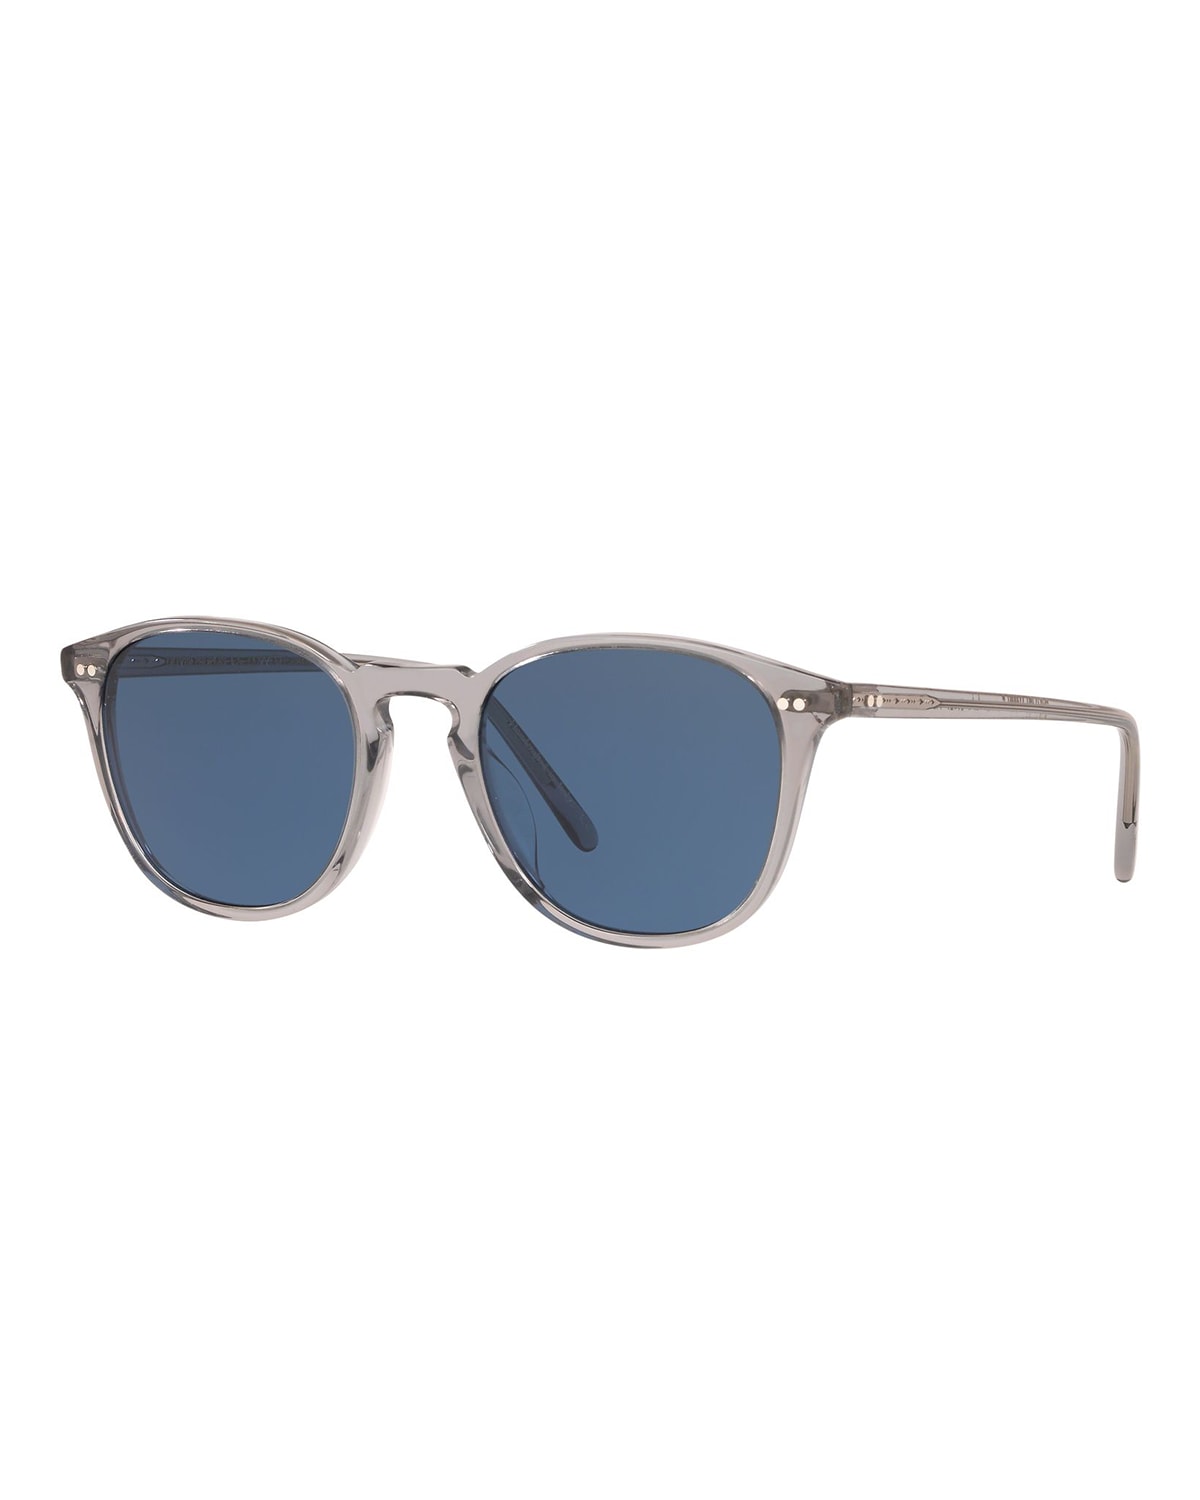 OLIVER PEOPLES FORMAN SQUARE POLARIZED SUNGLASSES